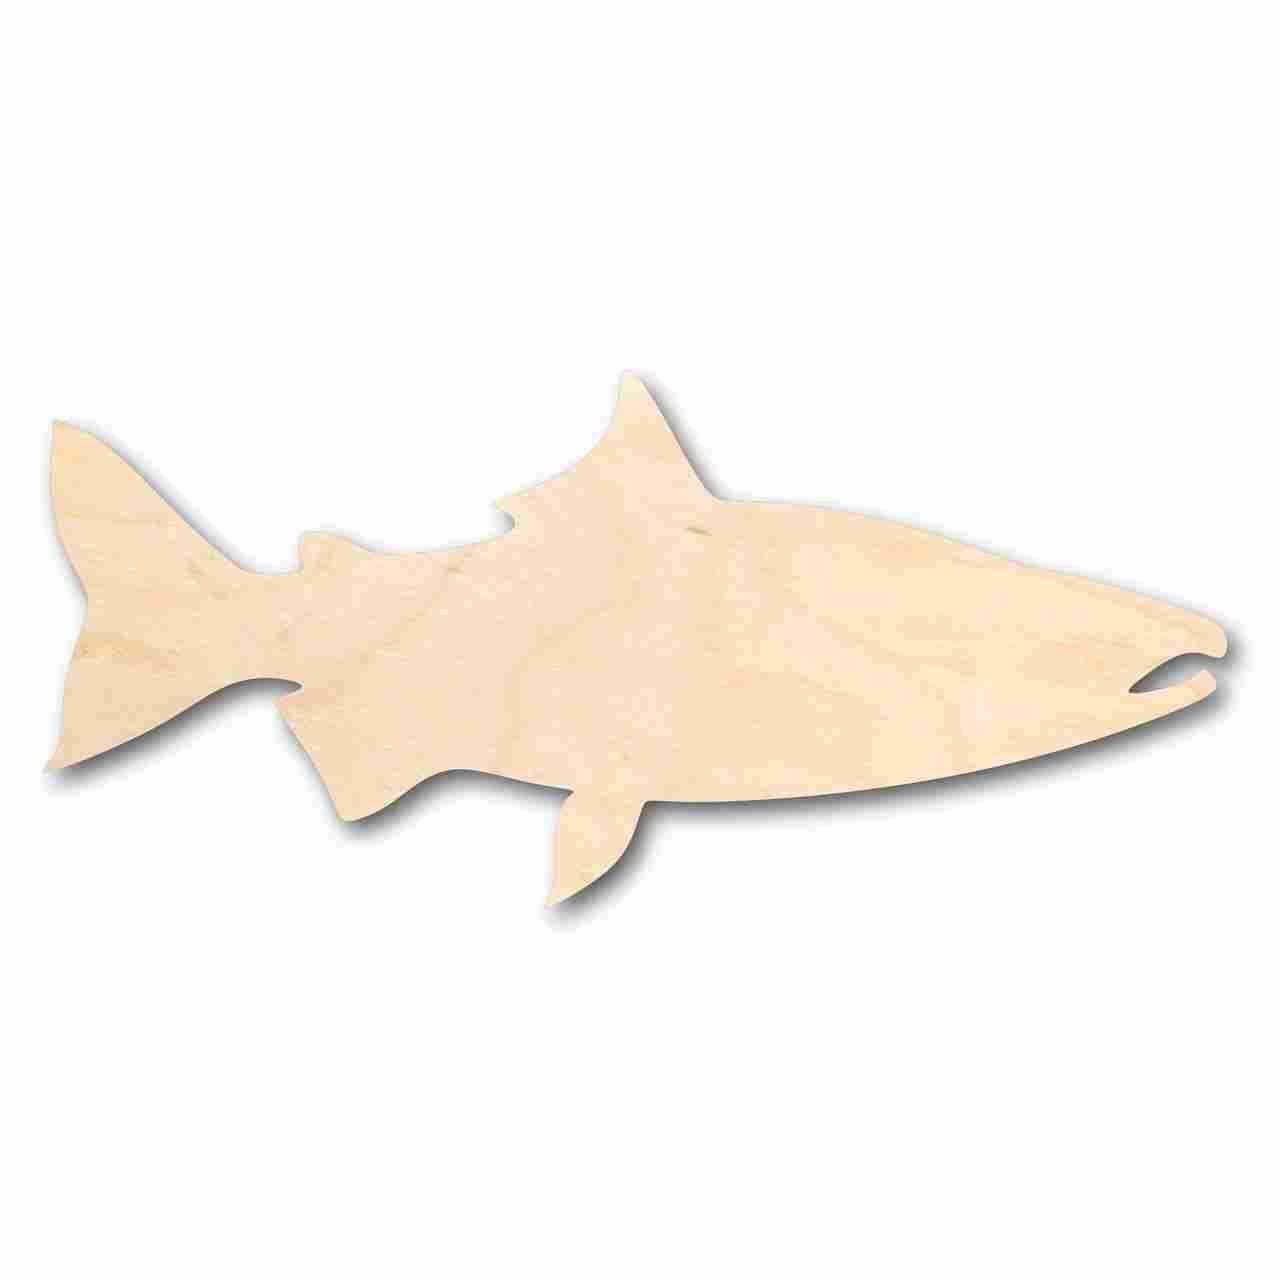 Unfinished Wooden Salmon Fish Shape - Ocean - Rivers - Alaska - Craft - up to 24